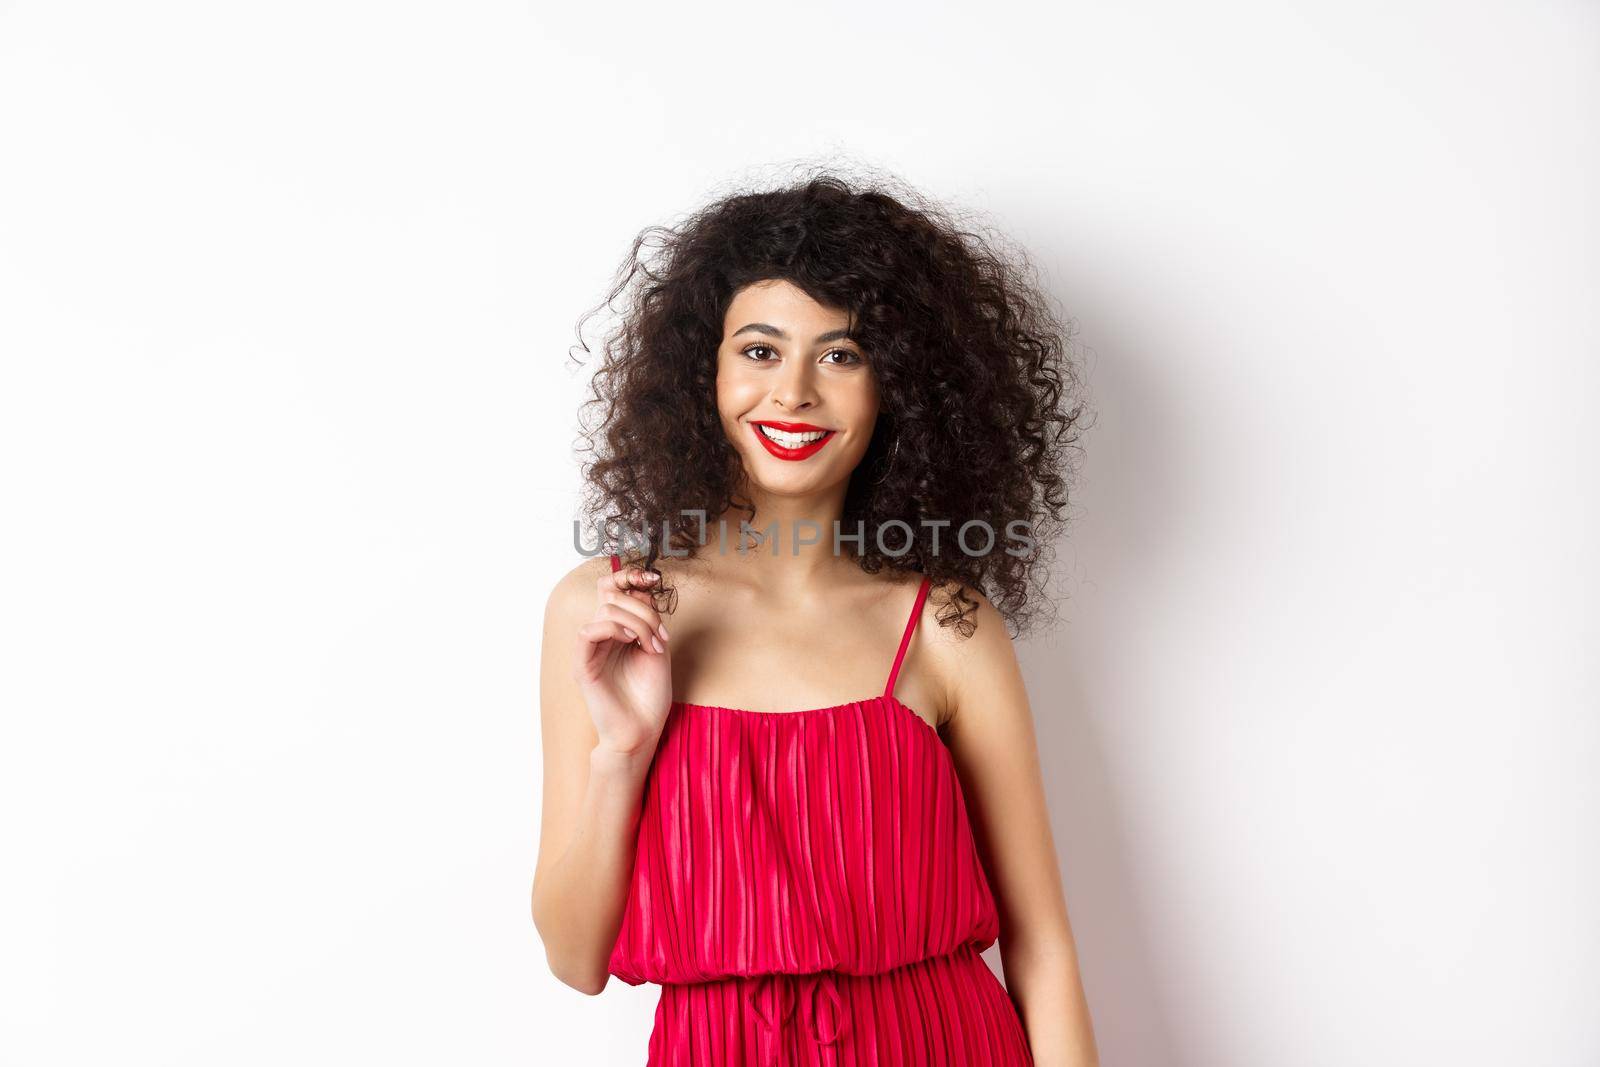 Beautiful woman with curly hair and makeup, wearing elegant dress for romantic date, standing happy on white background.